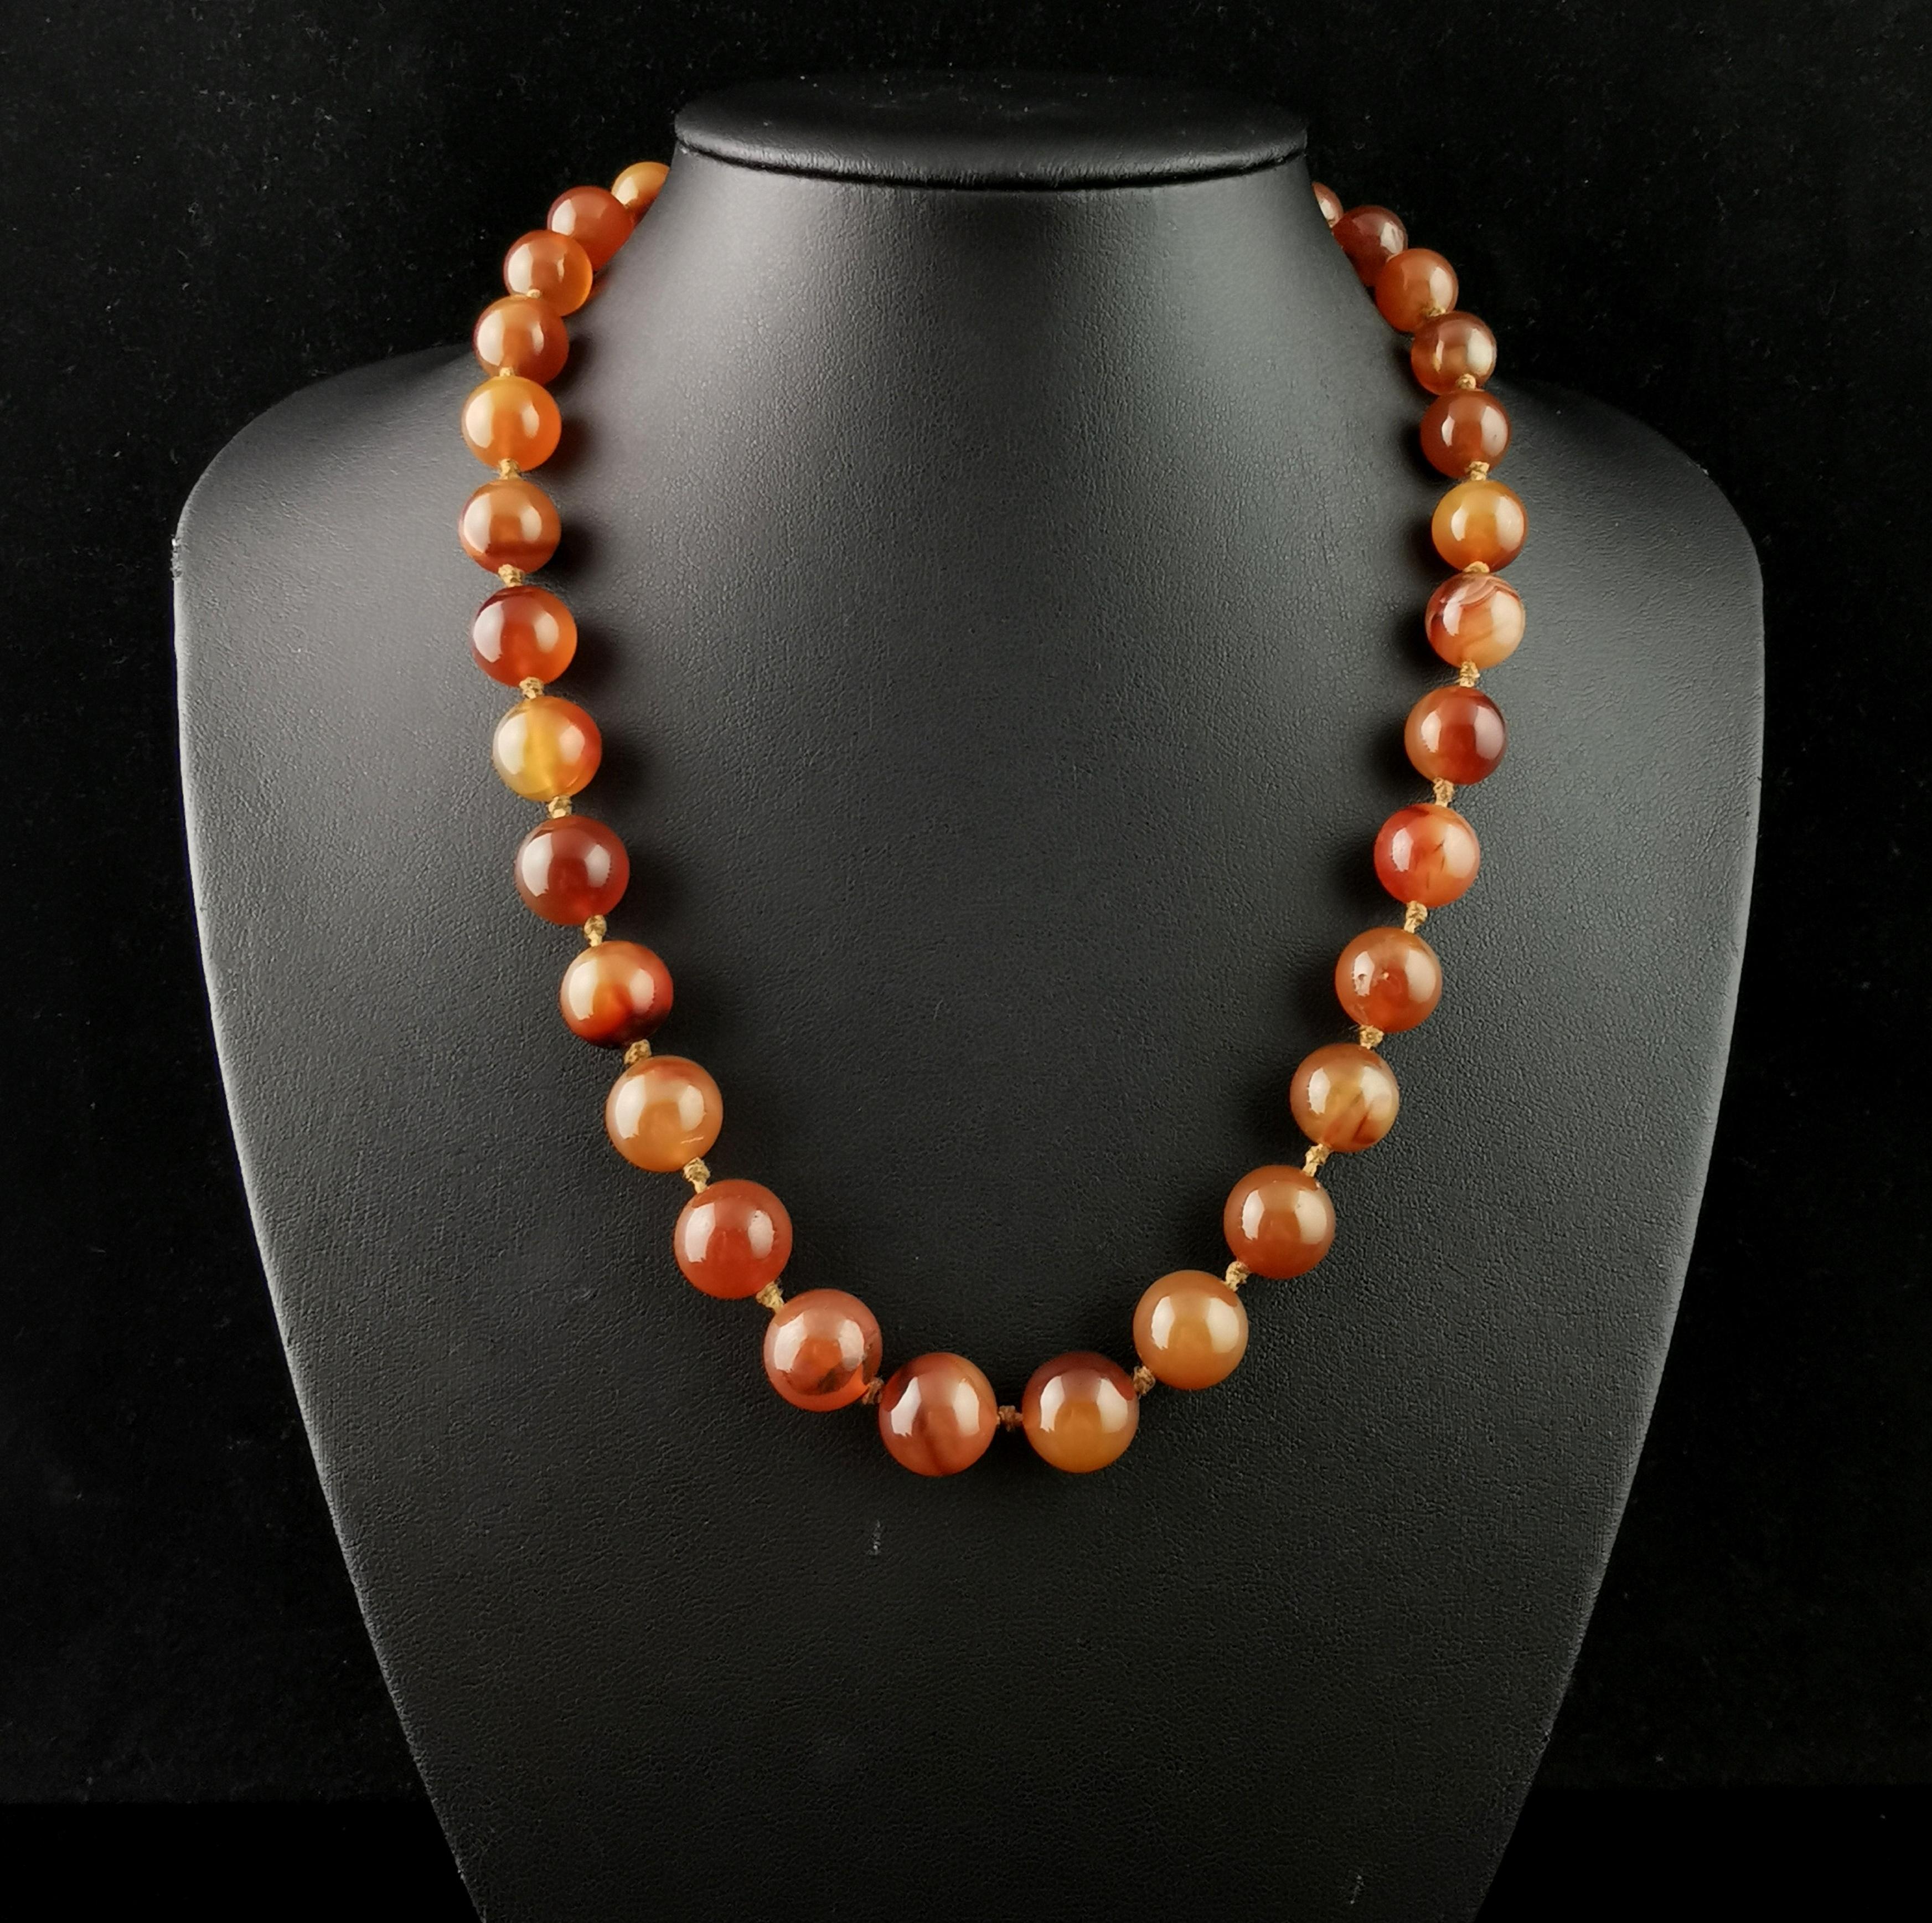 A beautiful antique agate bead necklace.

Slightly graduated rich Carnelian beads with swirling tones of deep red to orangey red make up this lush necklace.

The beads are spherical in shape, each hand carved and polished and strung onto a cotton